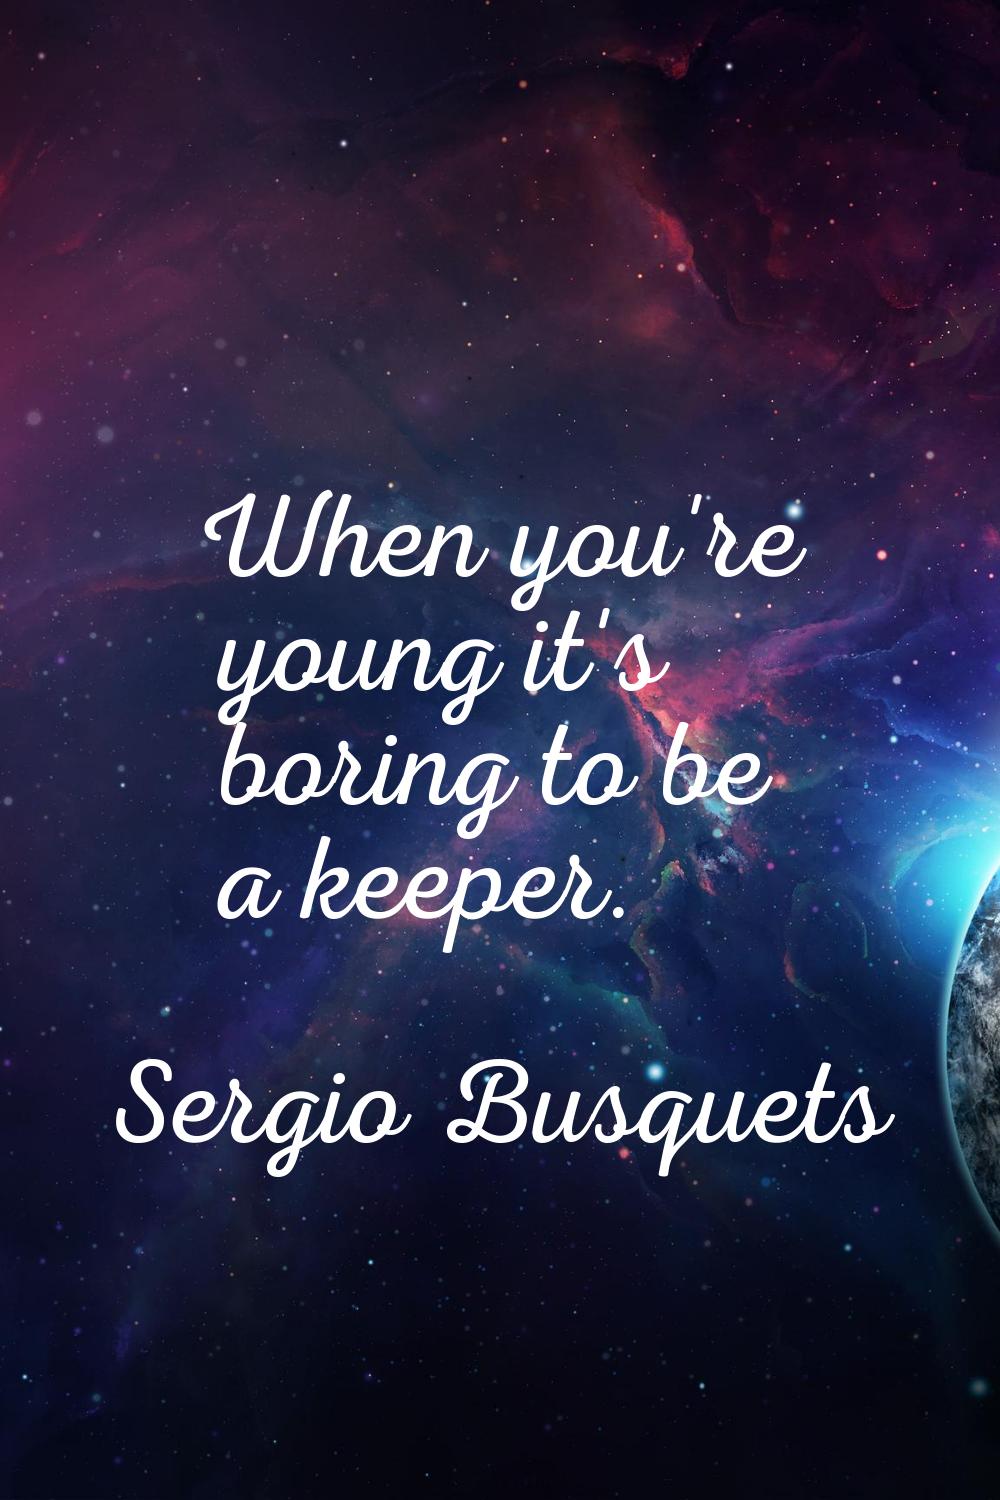 When you're young it's boring to be a keeper.